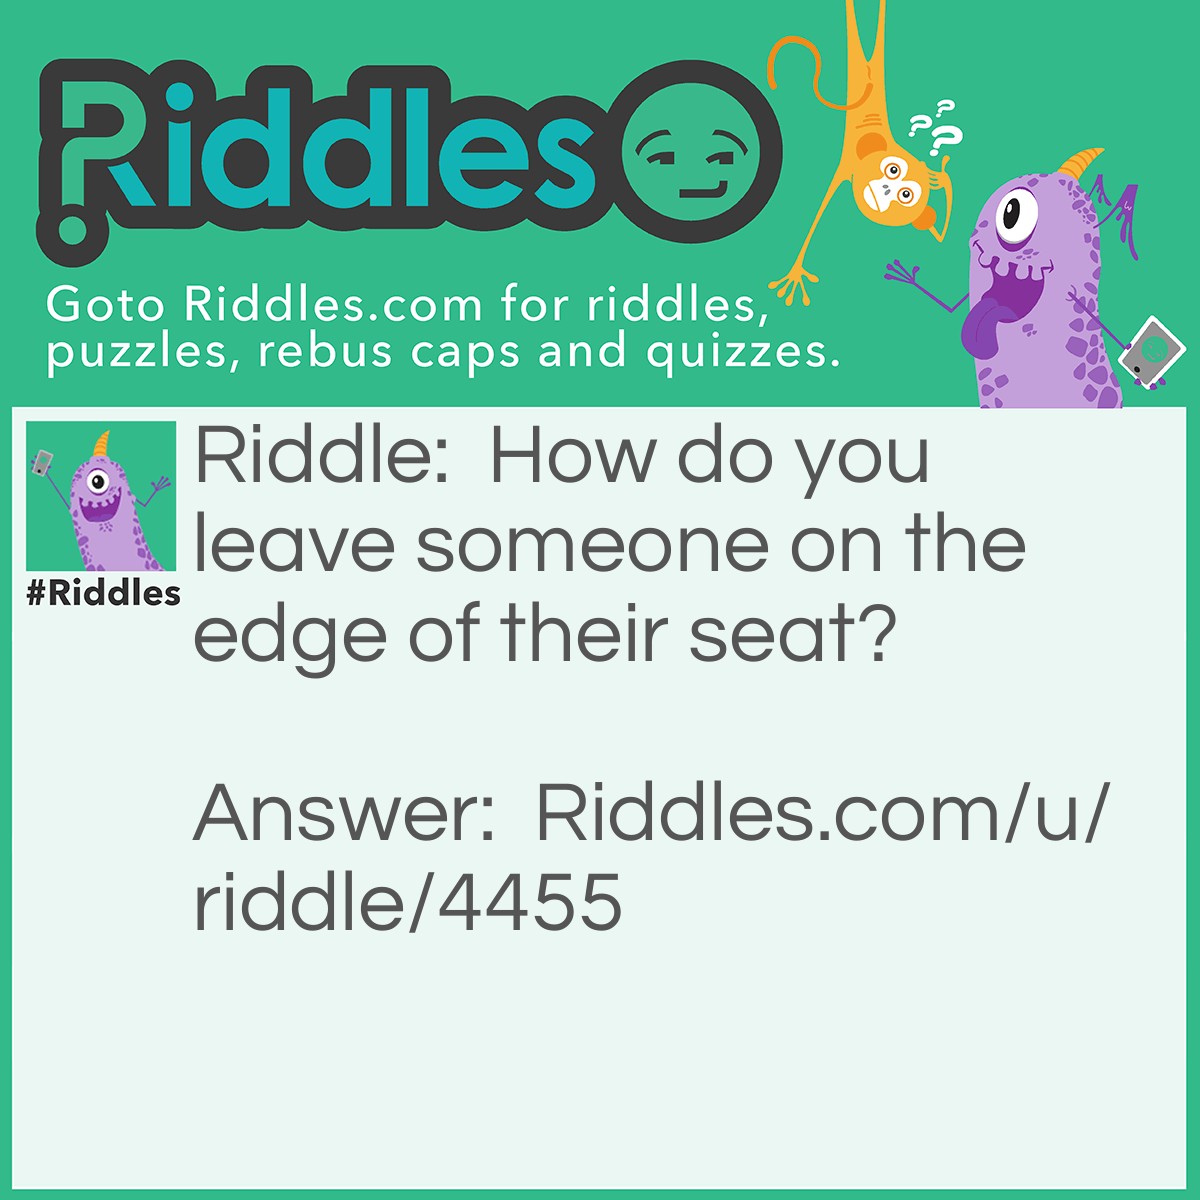 Riddle: How do you leave someone on the edge of their seat? Answer: I'll tell you tomorrow. >:)